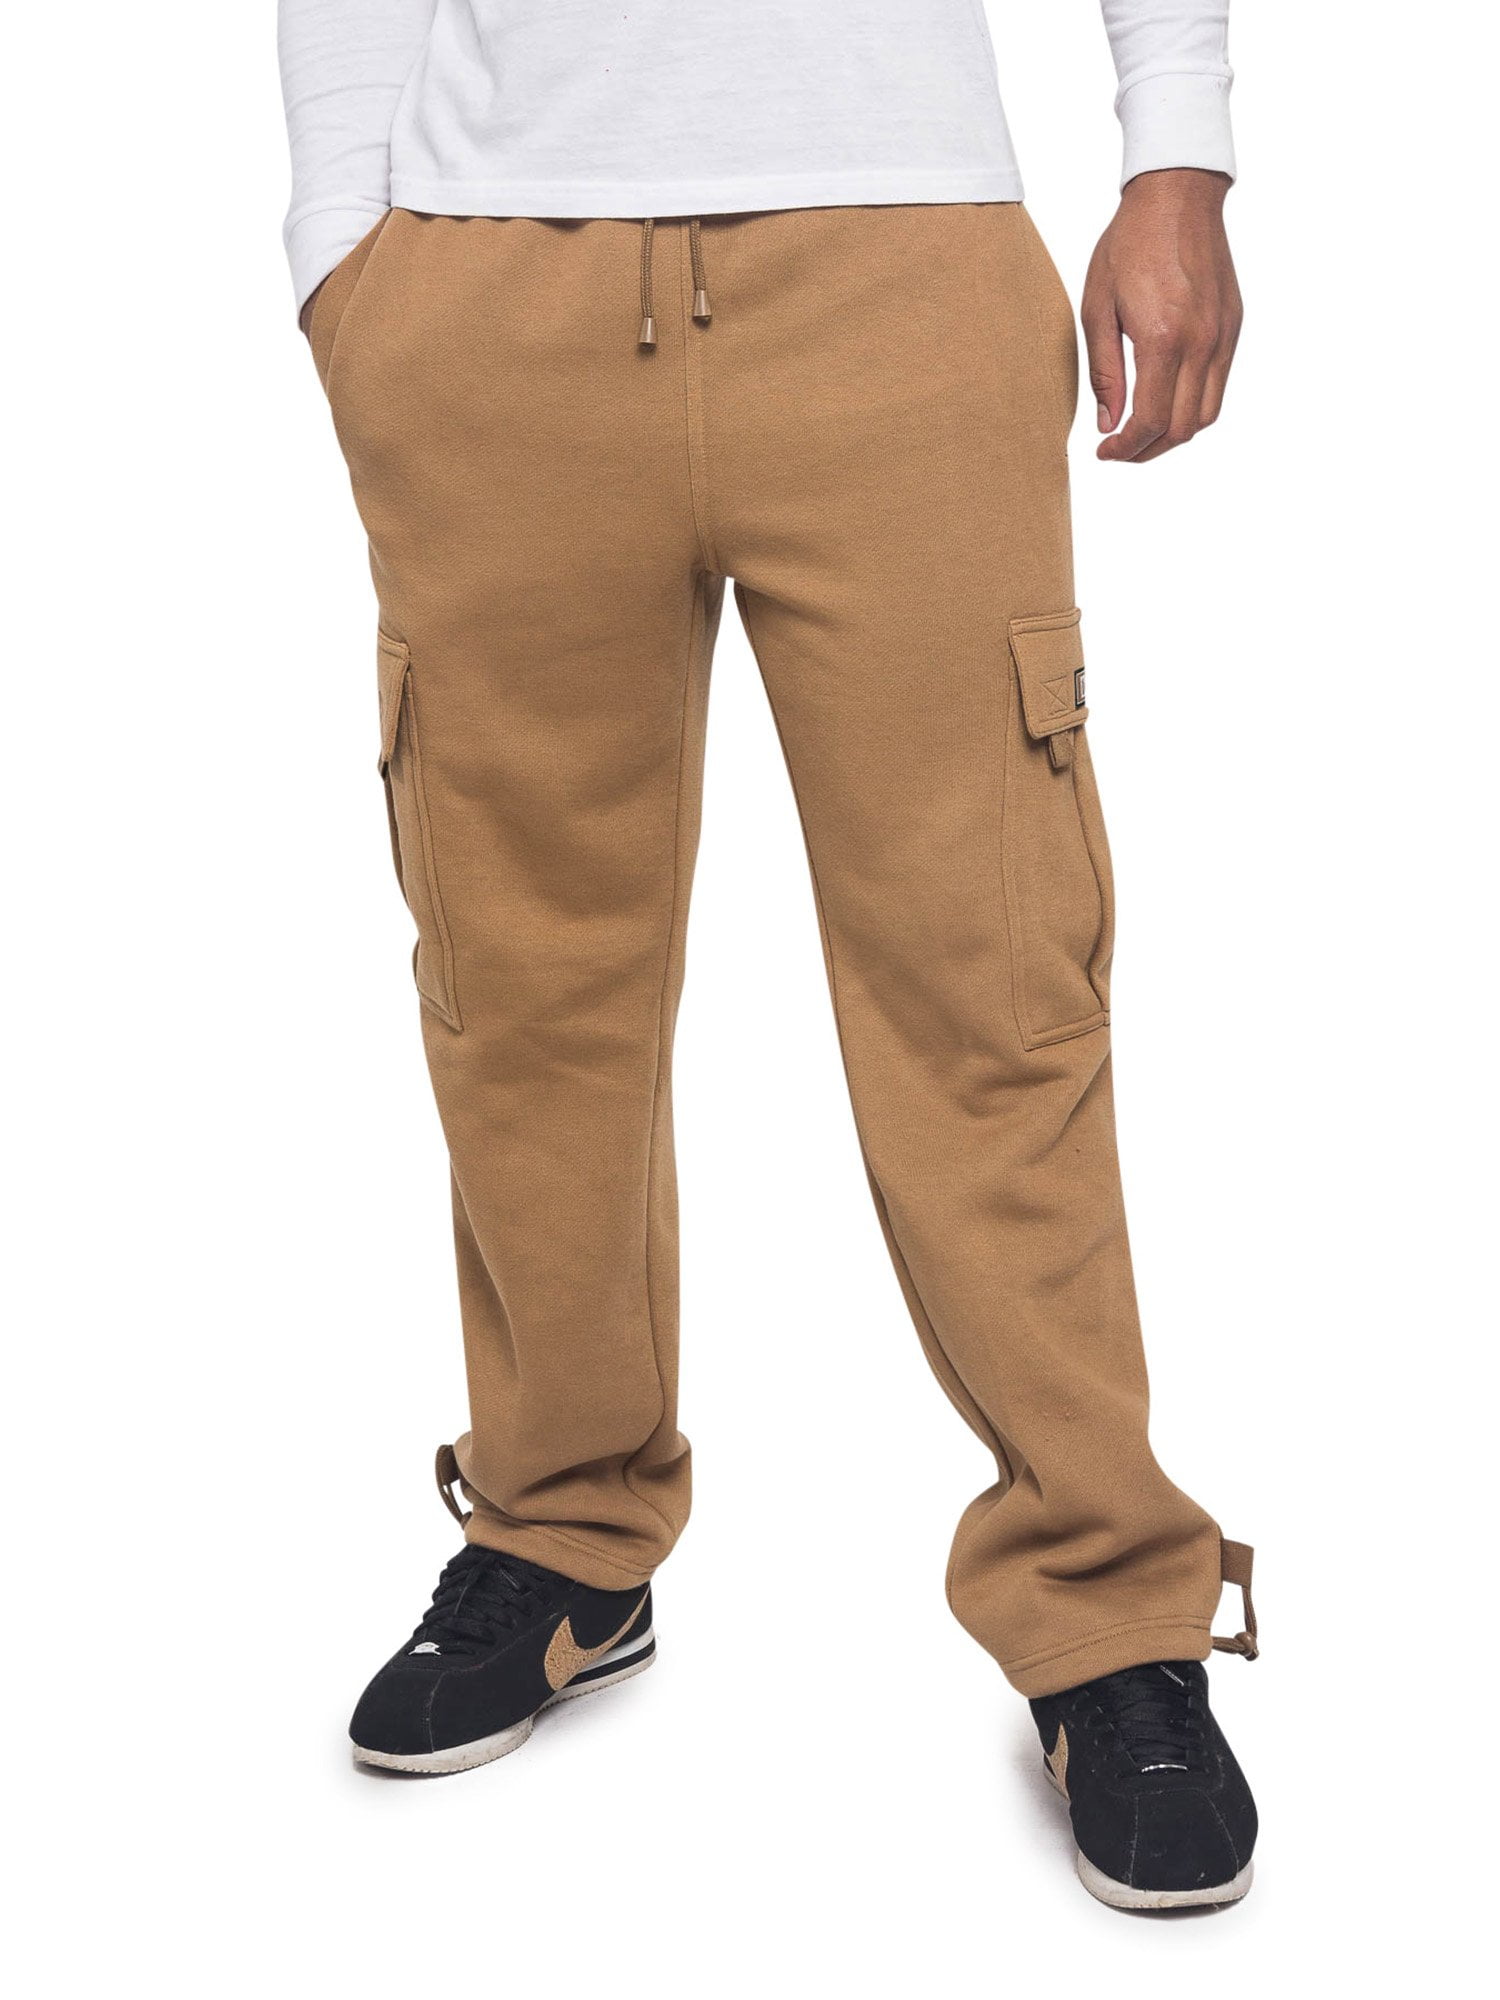 Victorious Men's Heavyweight Fleece Relaxed Lounge Cargo Sweatpants - Wheat  - 5X-Large